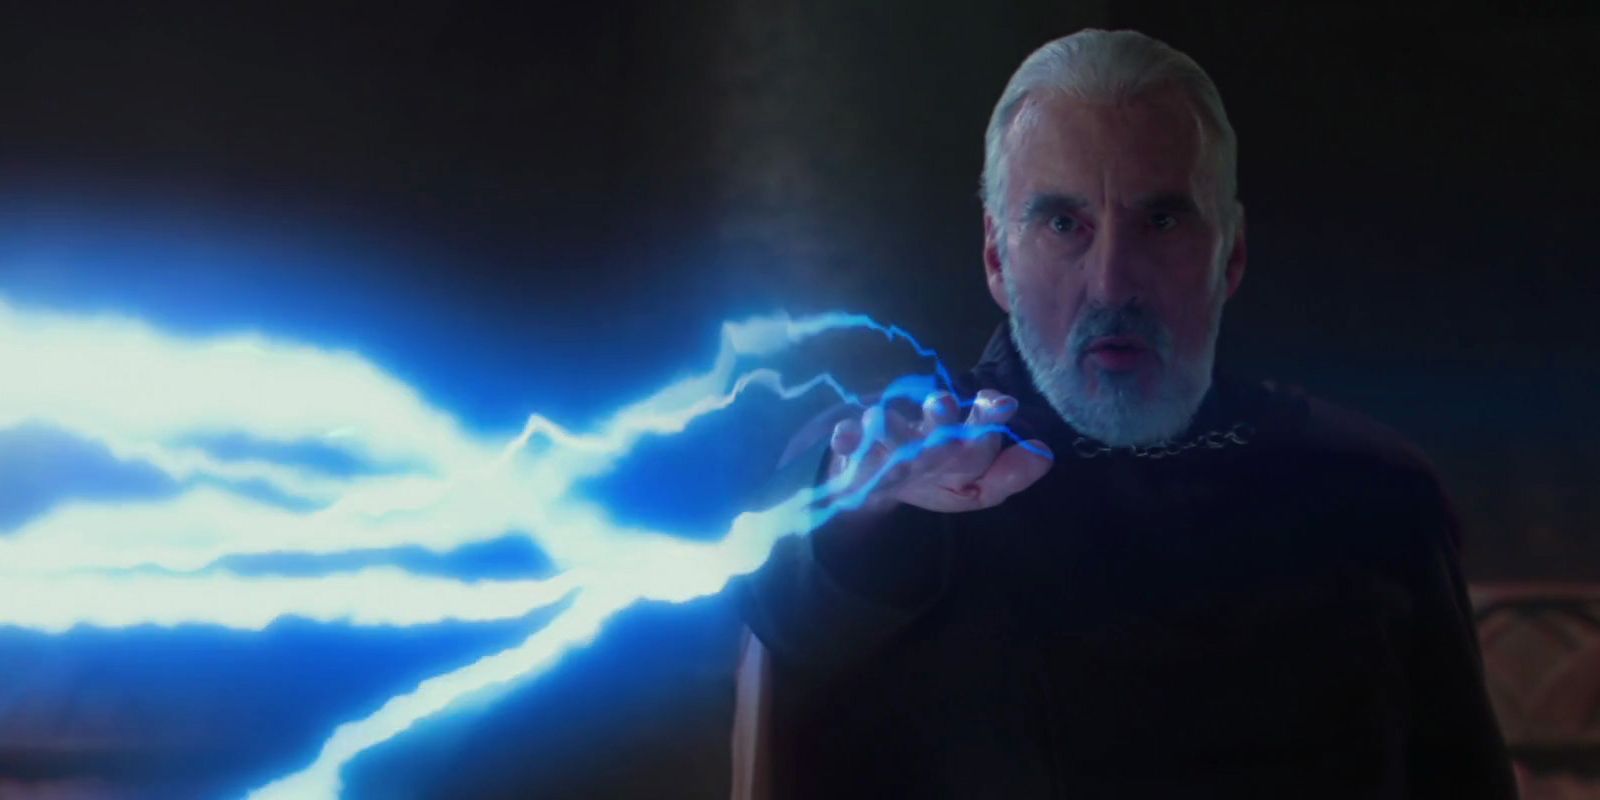 Count Dooku using force lightning in Star Wars: Episode 2 - Attack of the Clones